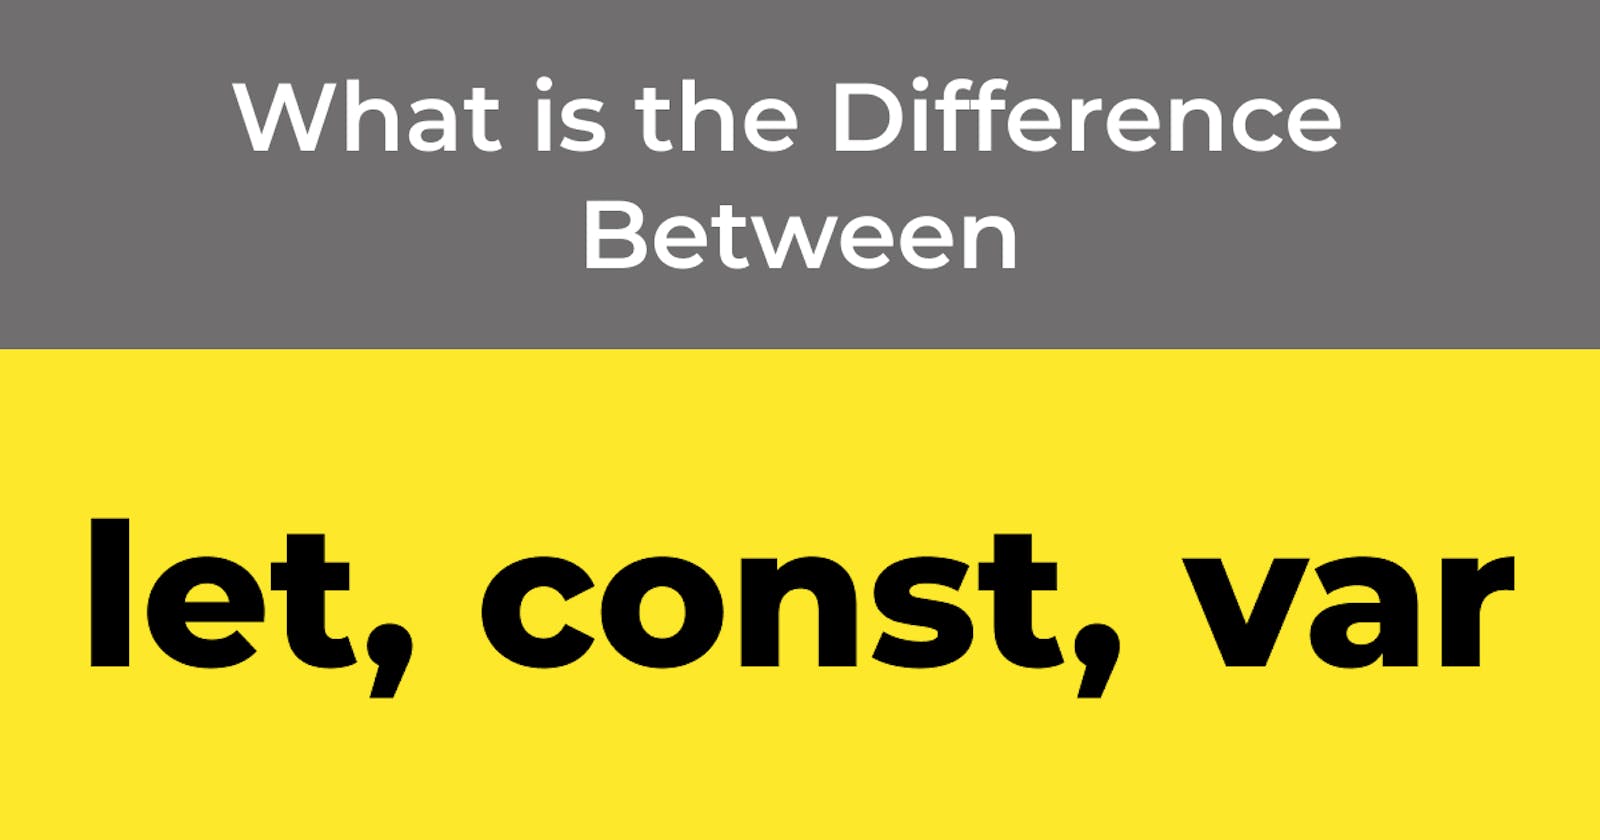 What is the Difference Between let, const, and var?